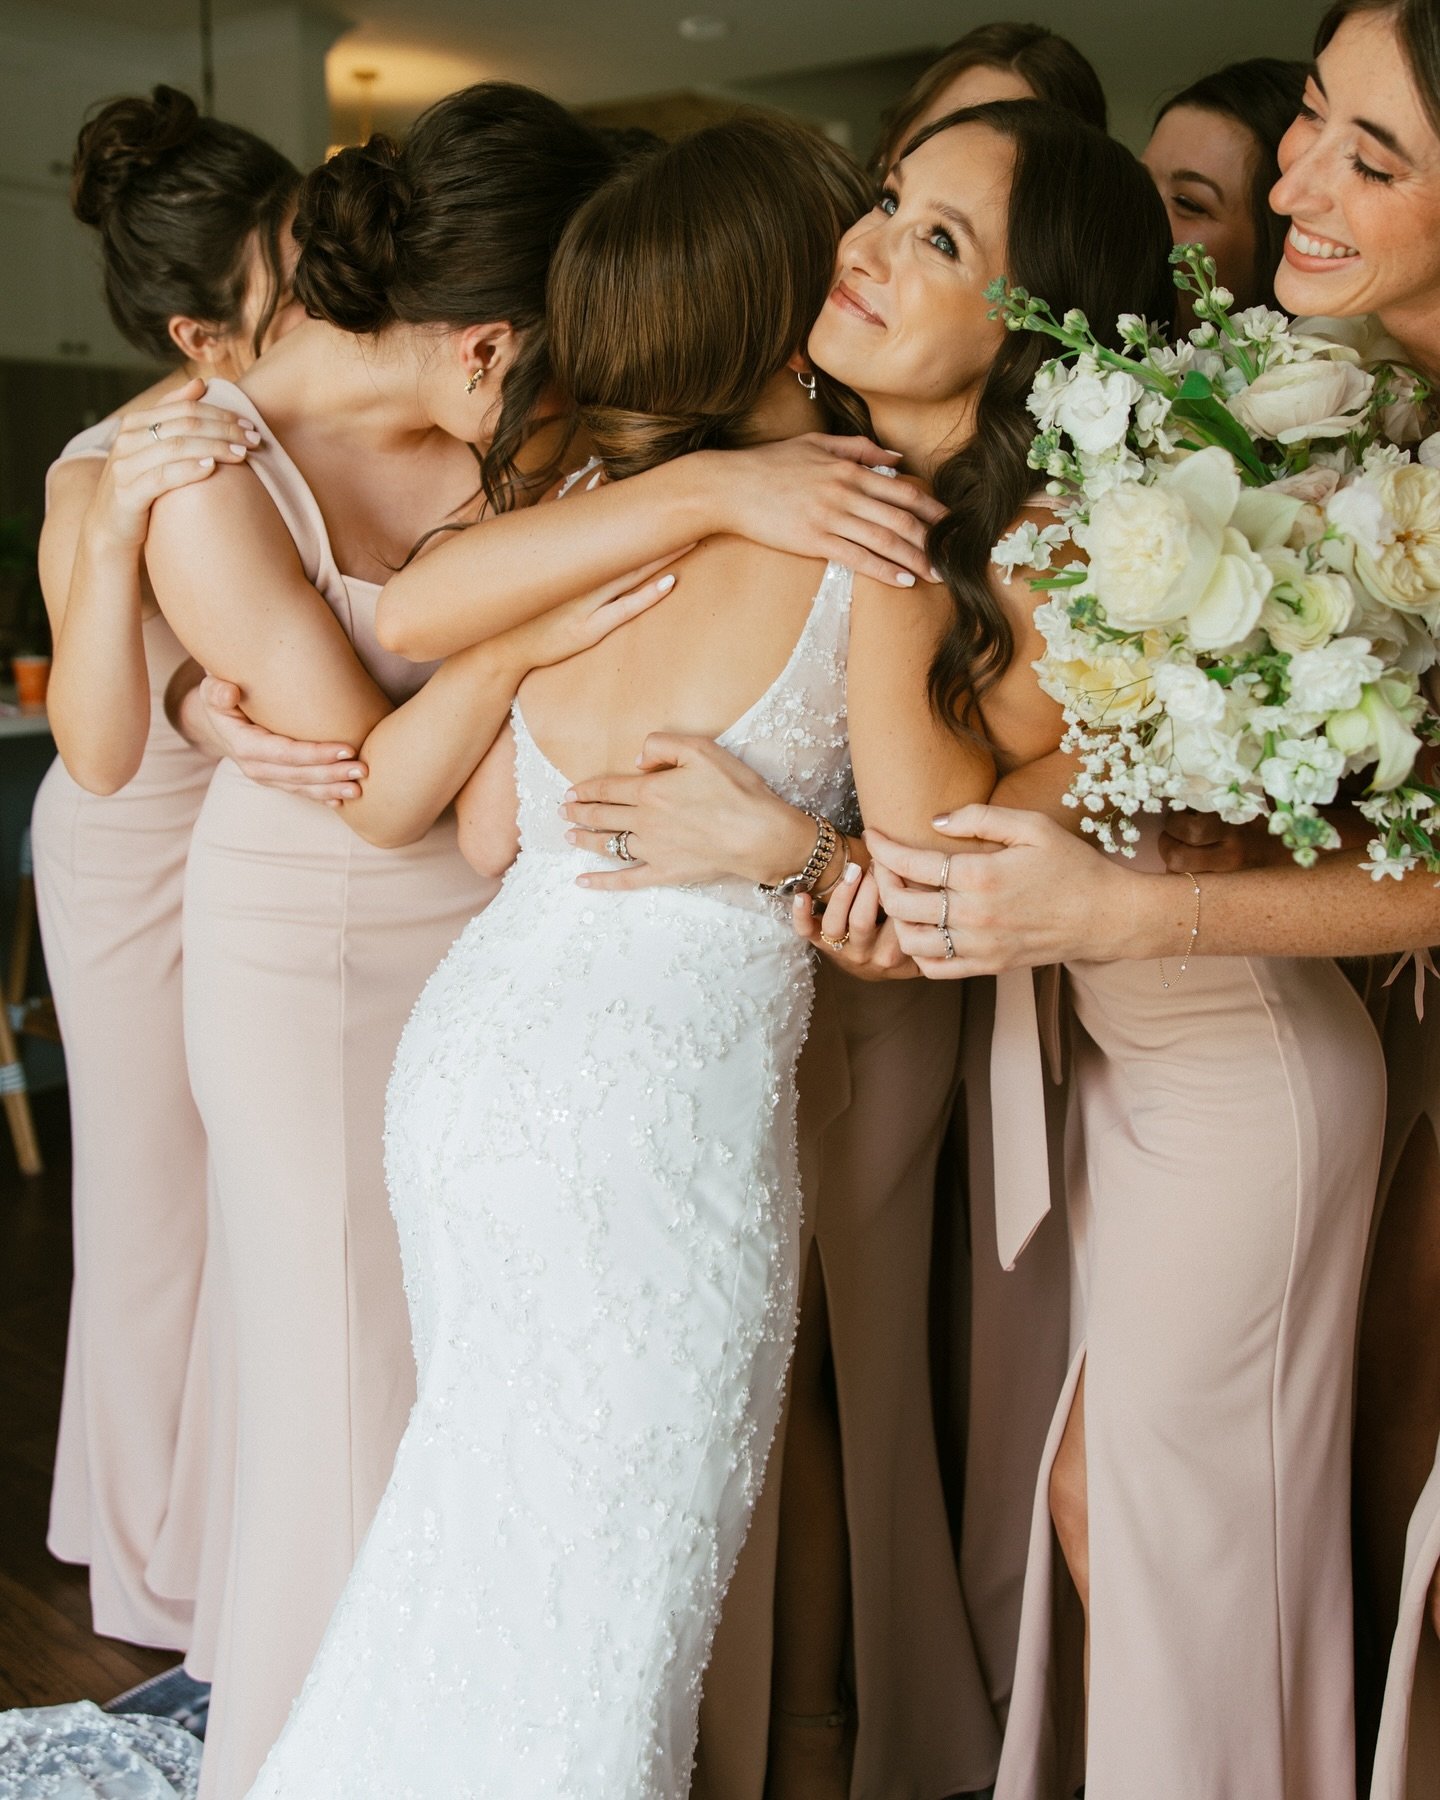 Female friendship is a beautiful bond that deserves celebration we have the privilege of listening to stories of friends who have gone through life together, sharing not only their wedding day, but many highs and lows in their life. I can&rsquo;t say